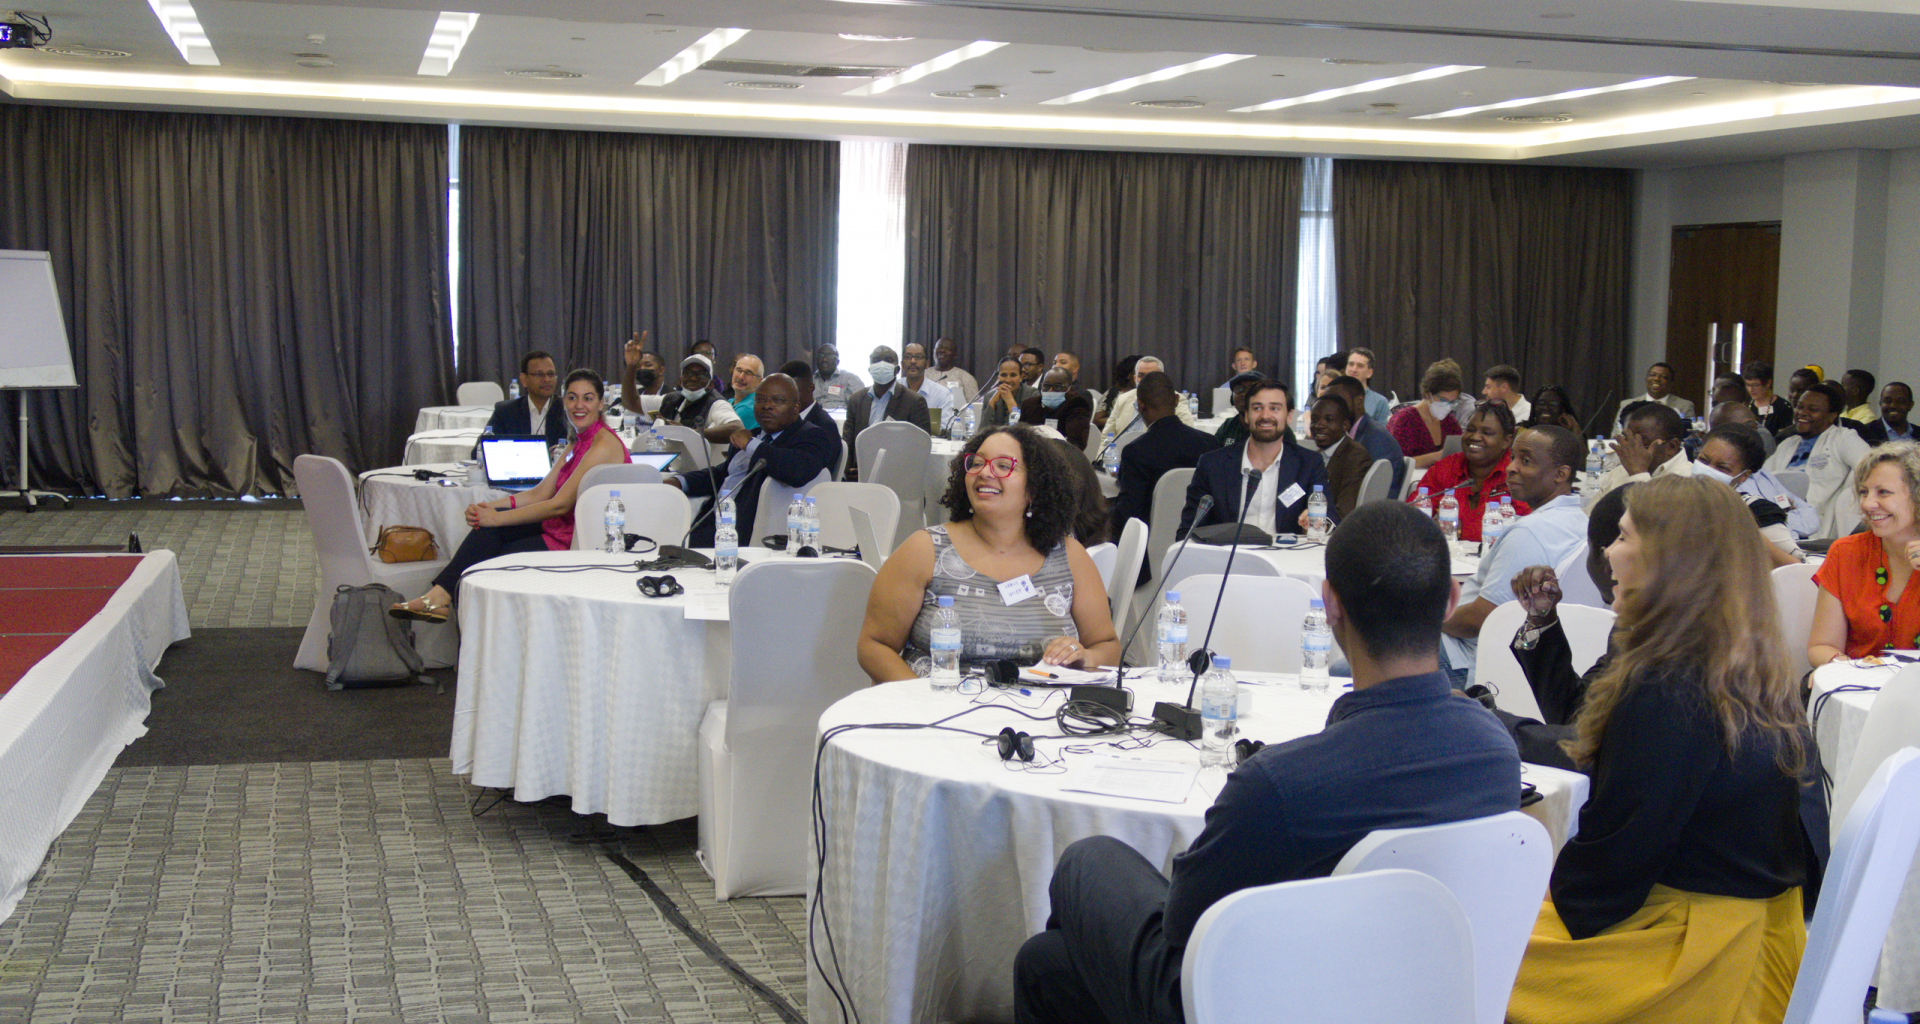 AFRICA REGIONAL FORUM FOR ACTION – INCLUSIVE & ACTIVE MOBILITY IN A CHANGING CLIMATE: ACF PARTICIPATED FULLY